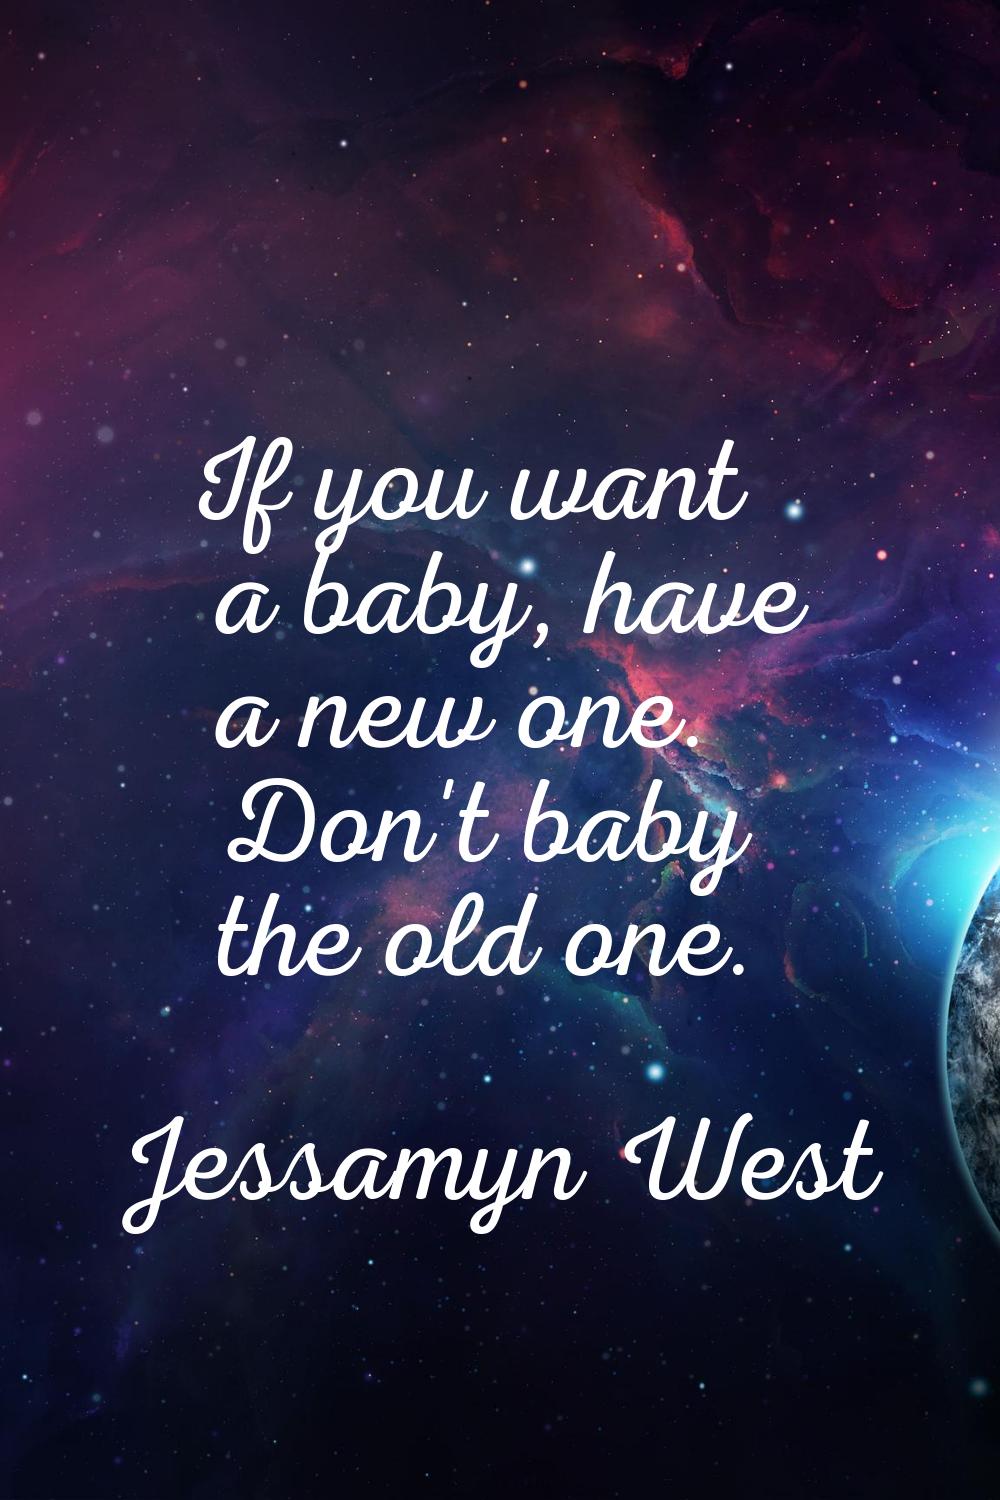 If you want a baby, have a new one. Don't baby the old one.